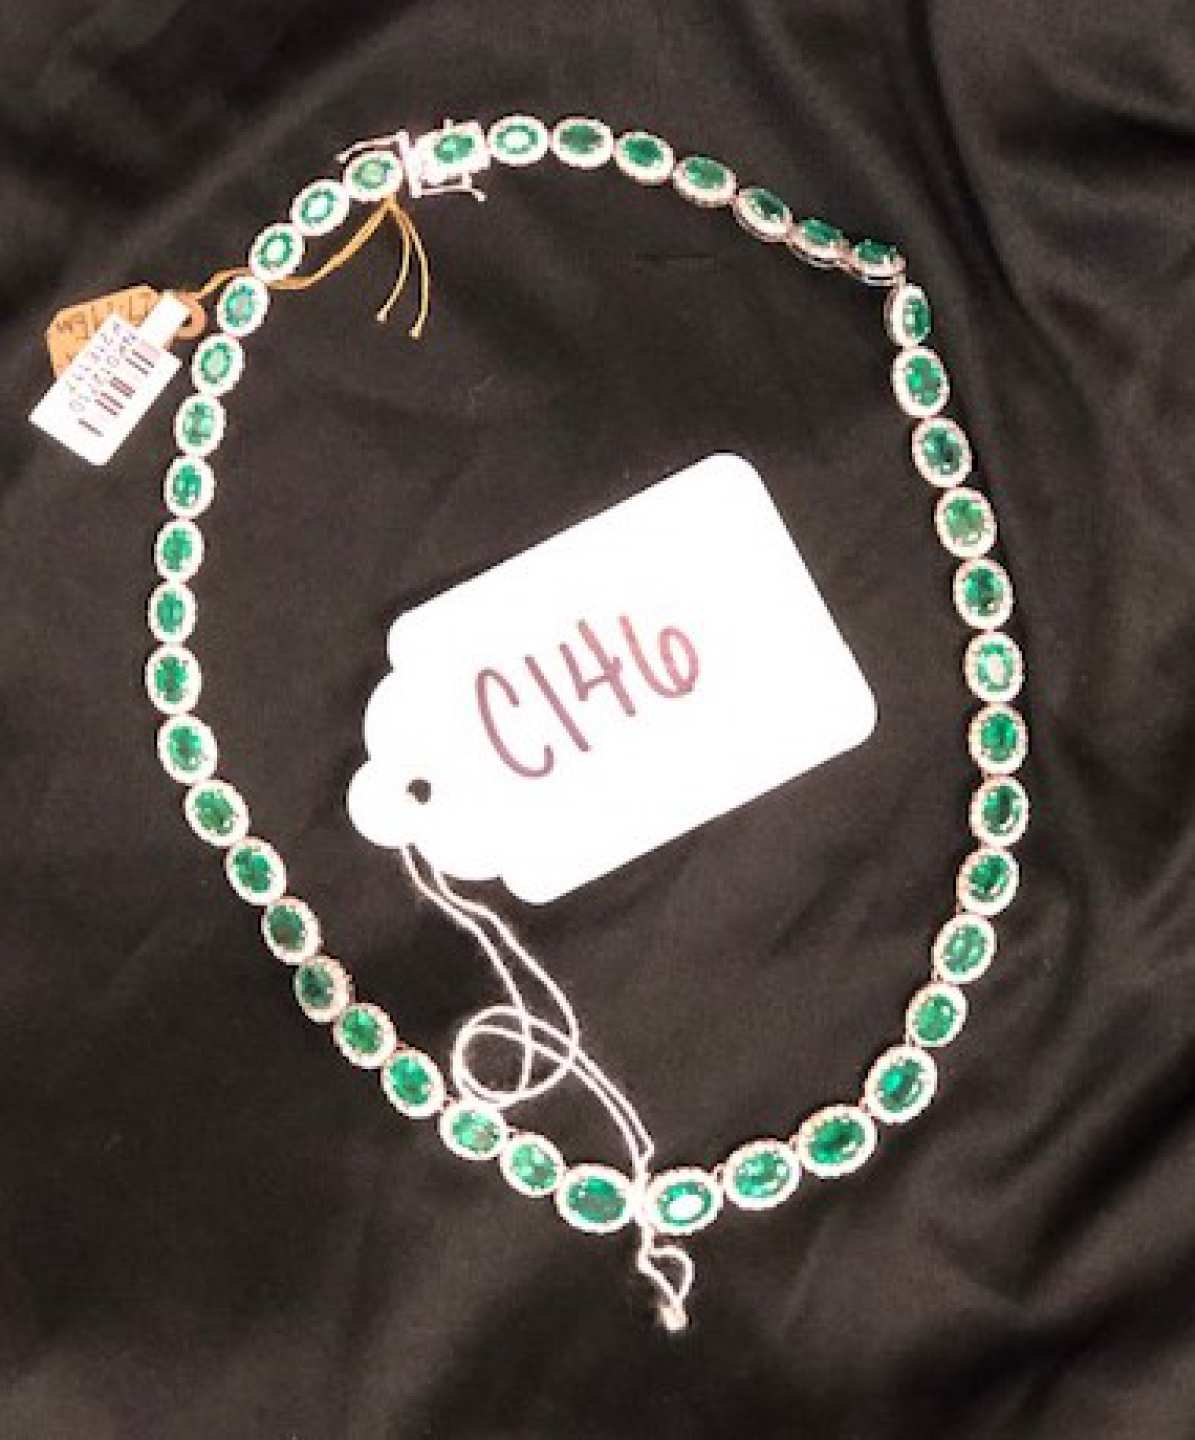 0th Image of a N/A 18K GOLD NECKLACE DIAMOND AND EMERALD